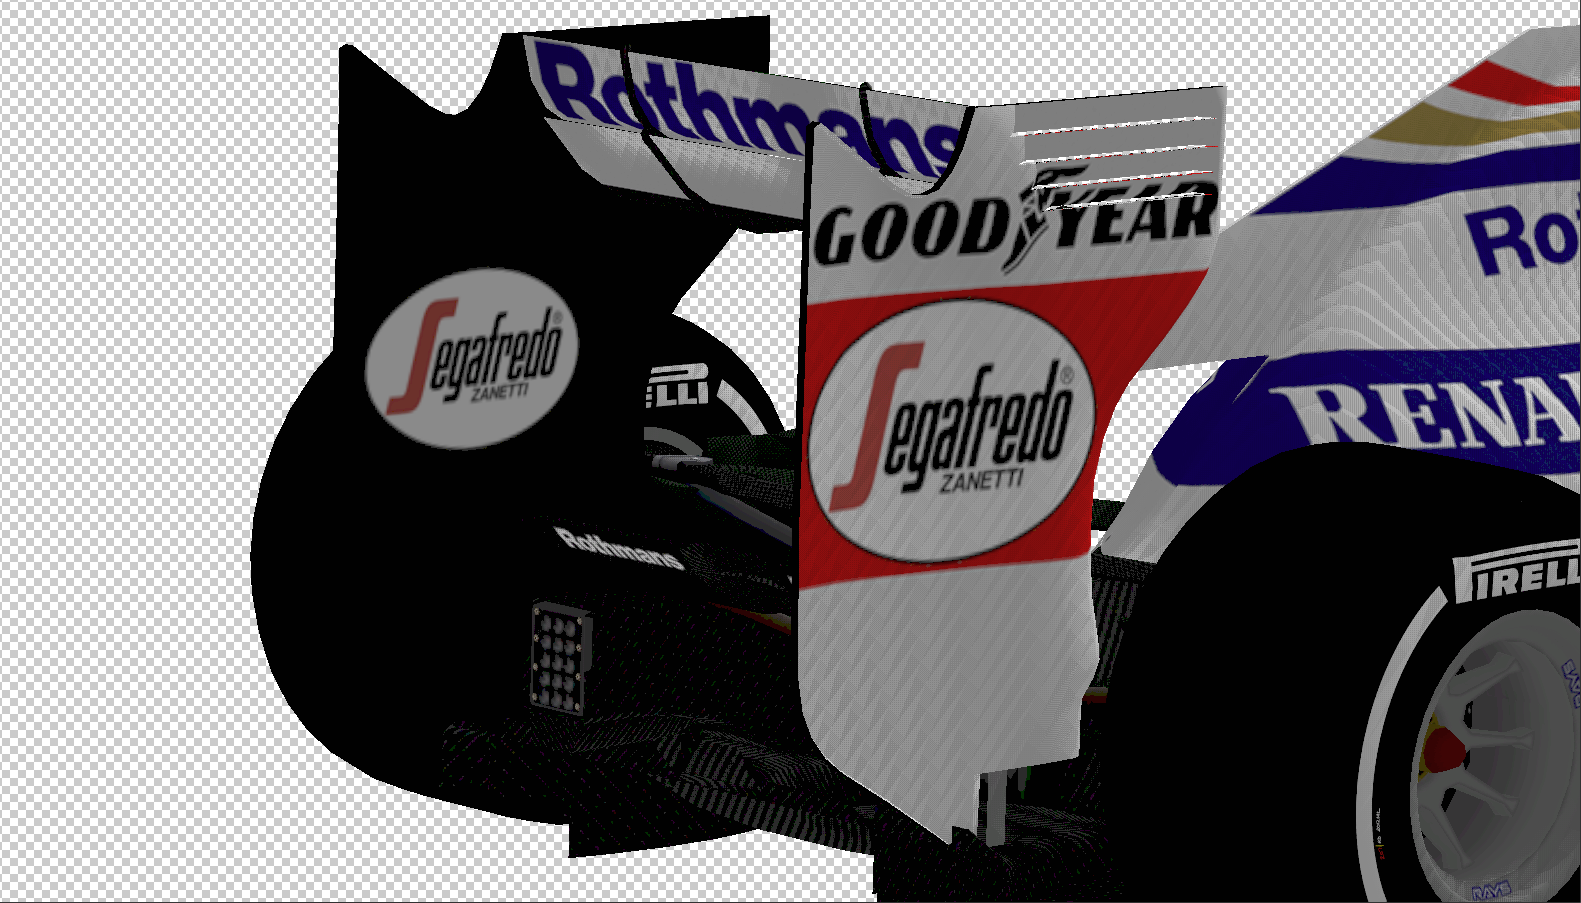 NFSG Finale Pack - 1995 Williams Rear.PNG